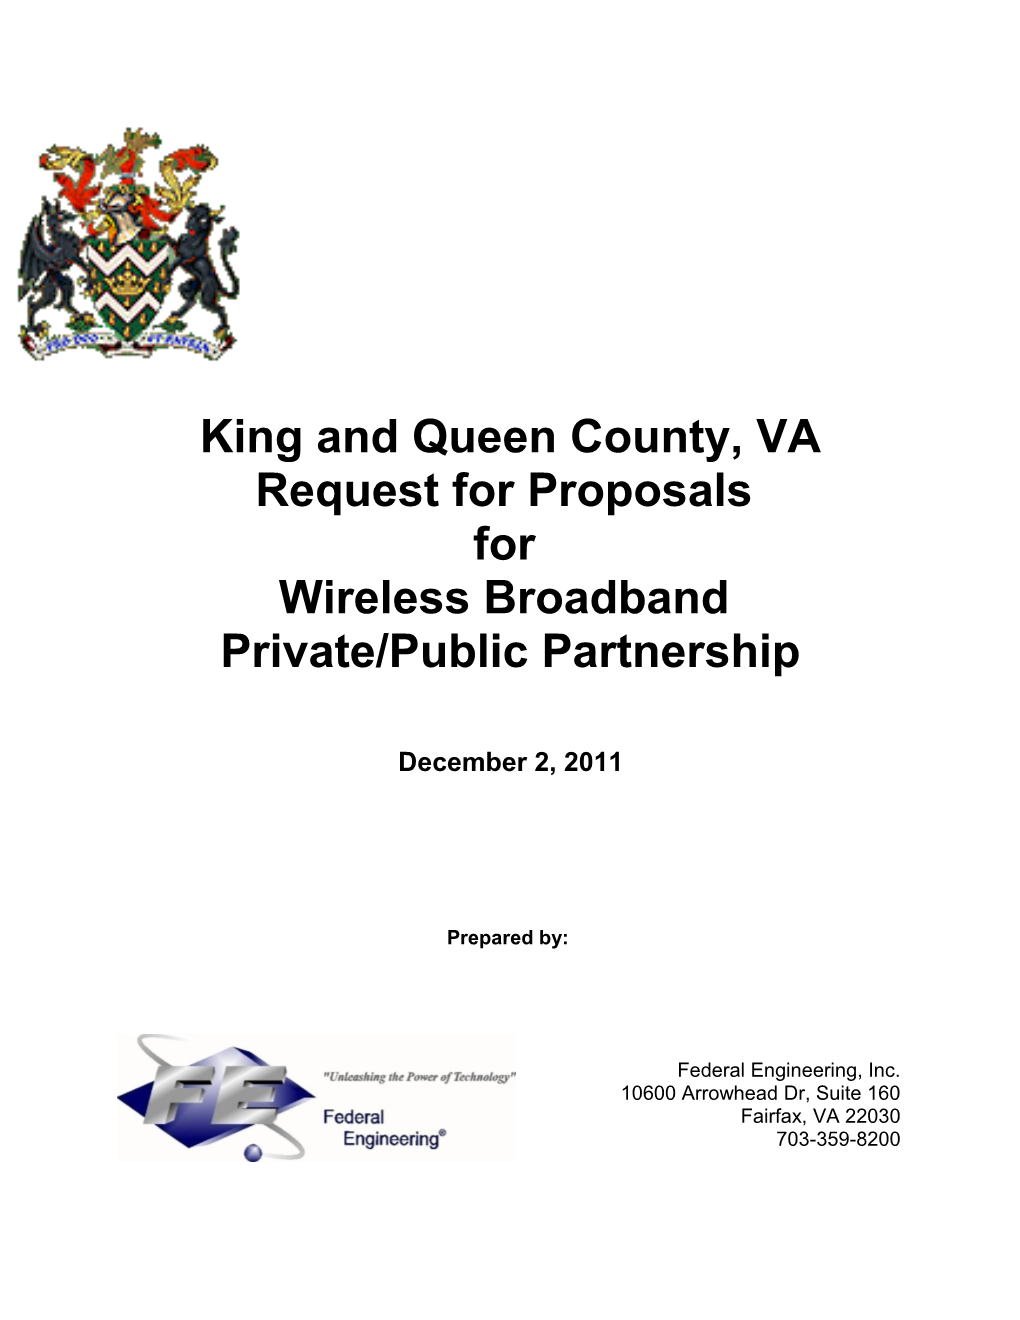 Public/Private Partnership King and Queen County, Virginia